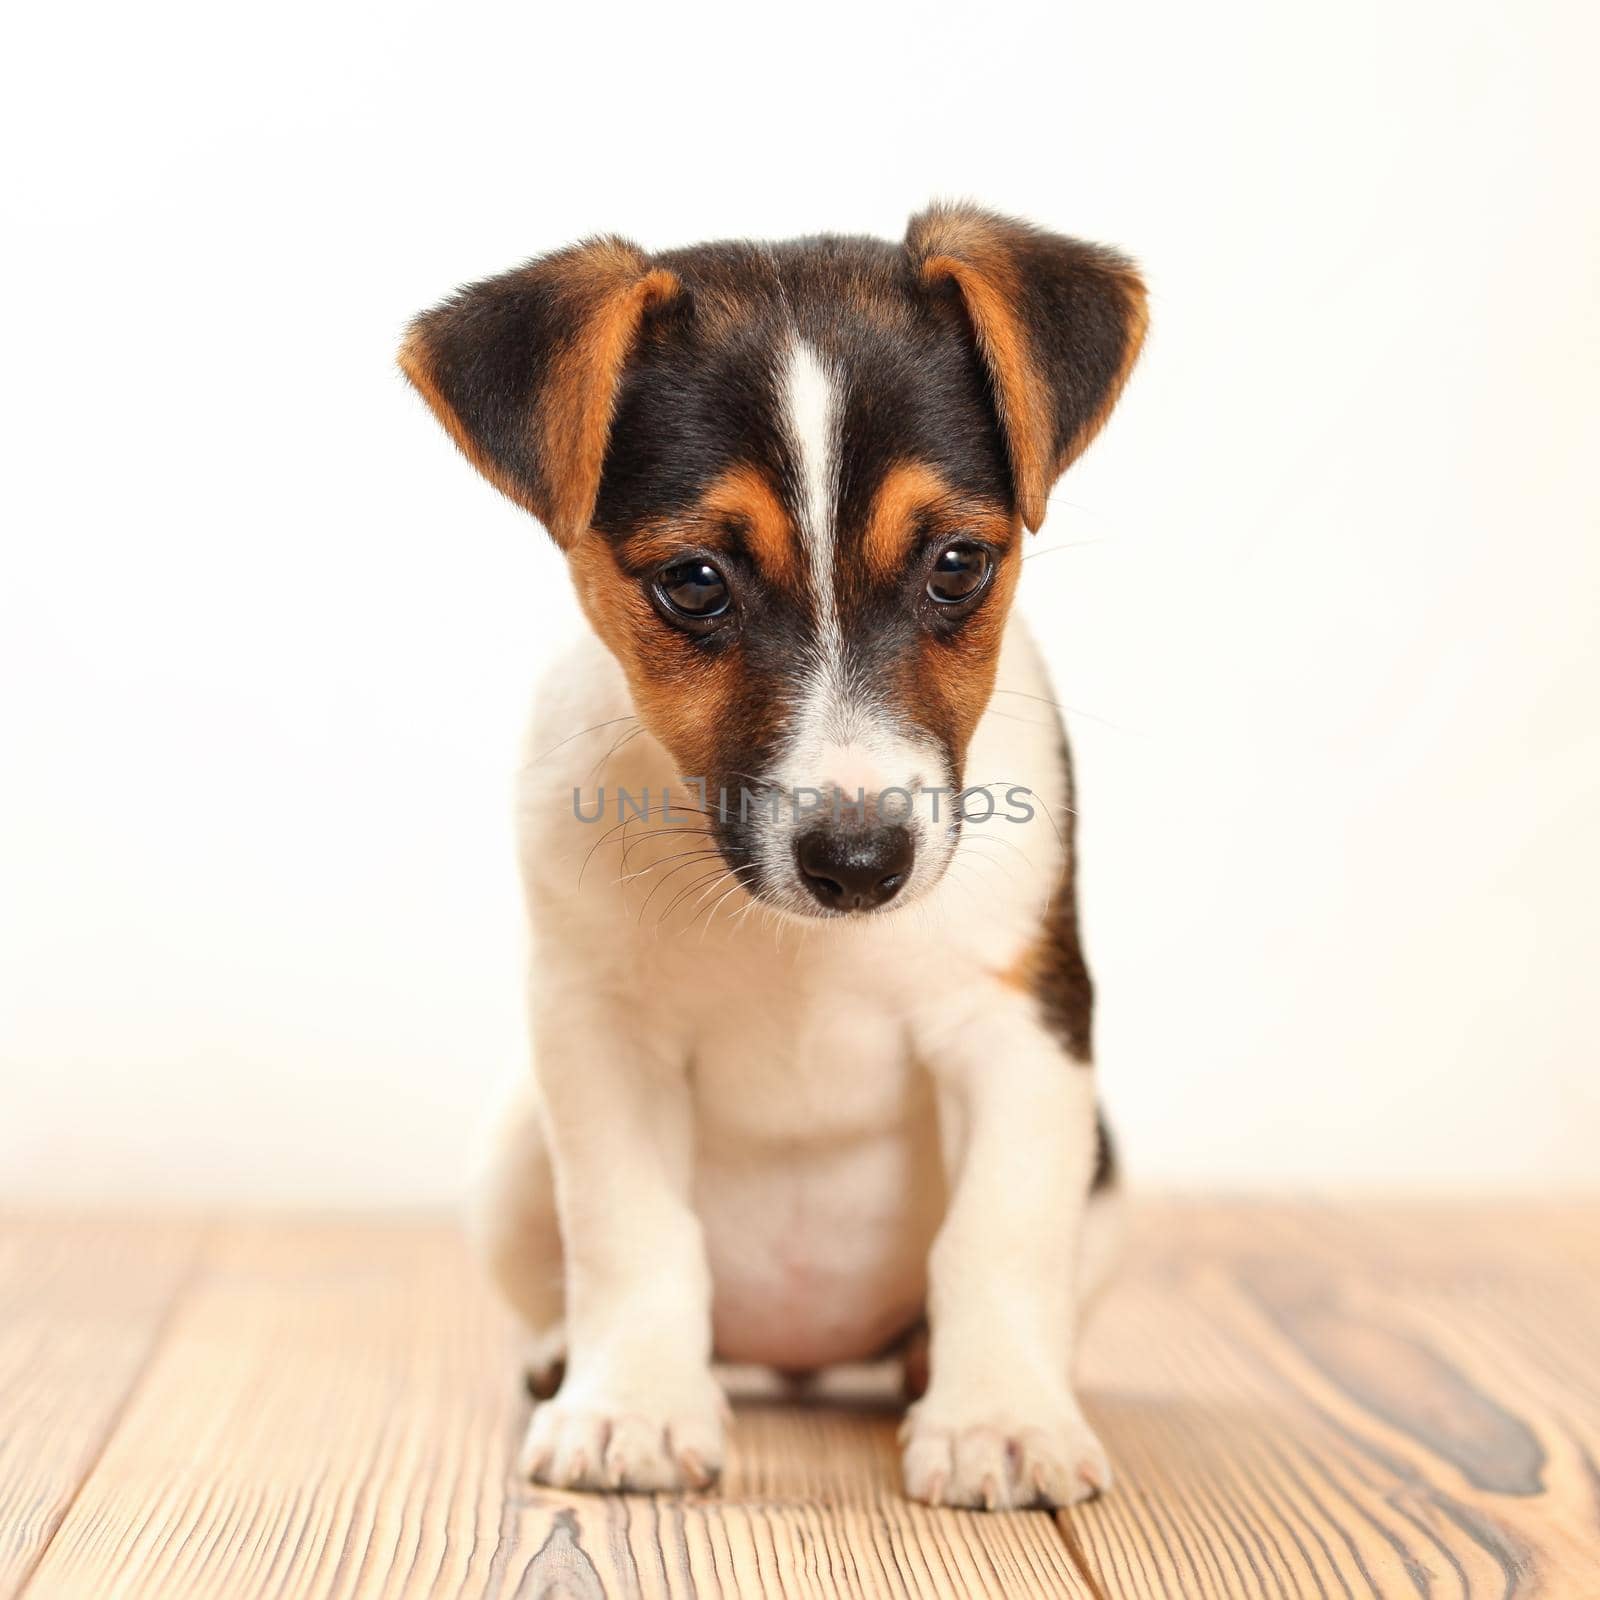 Jack Russell terrier puppy standing on wooden boards, white background, studio shot.